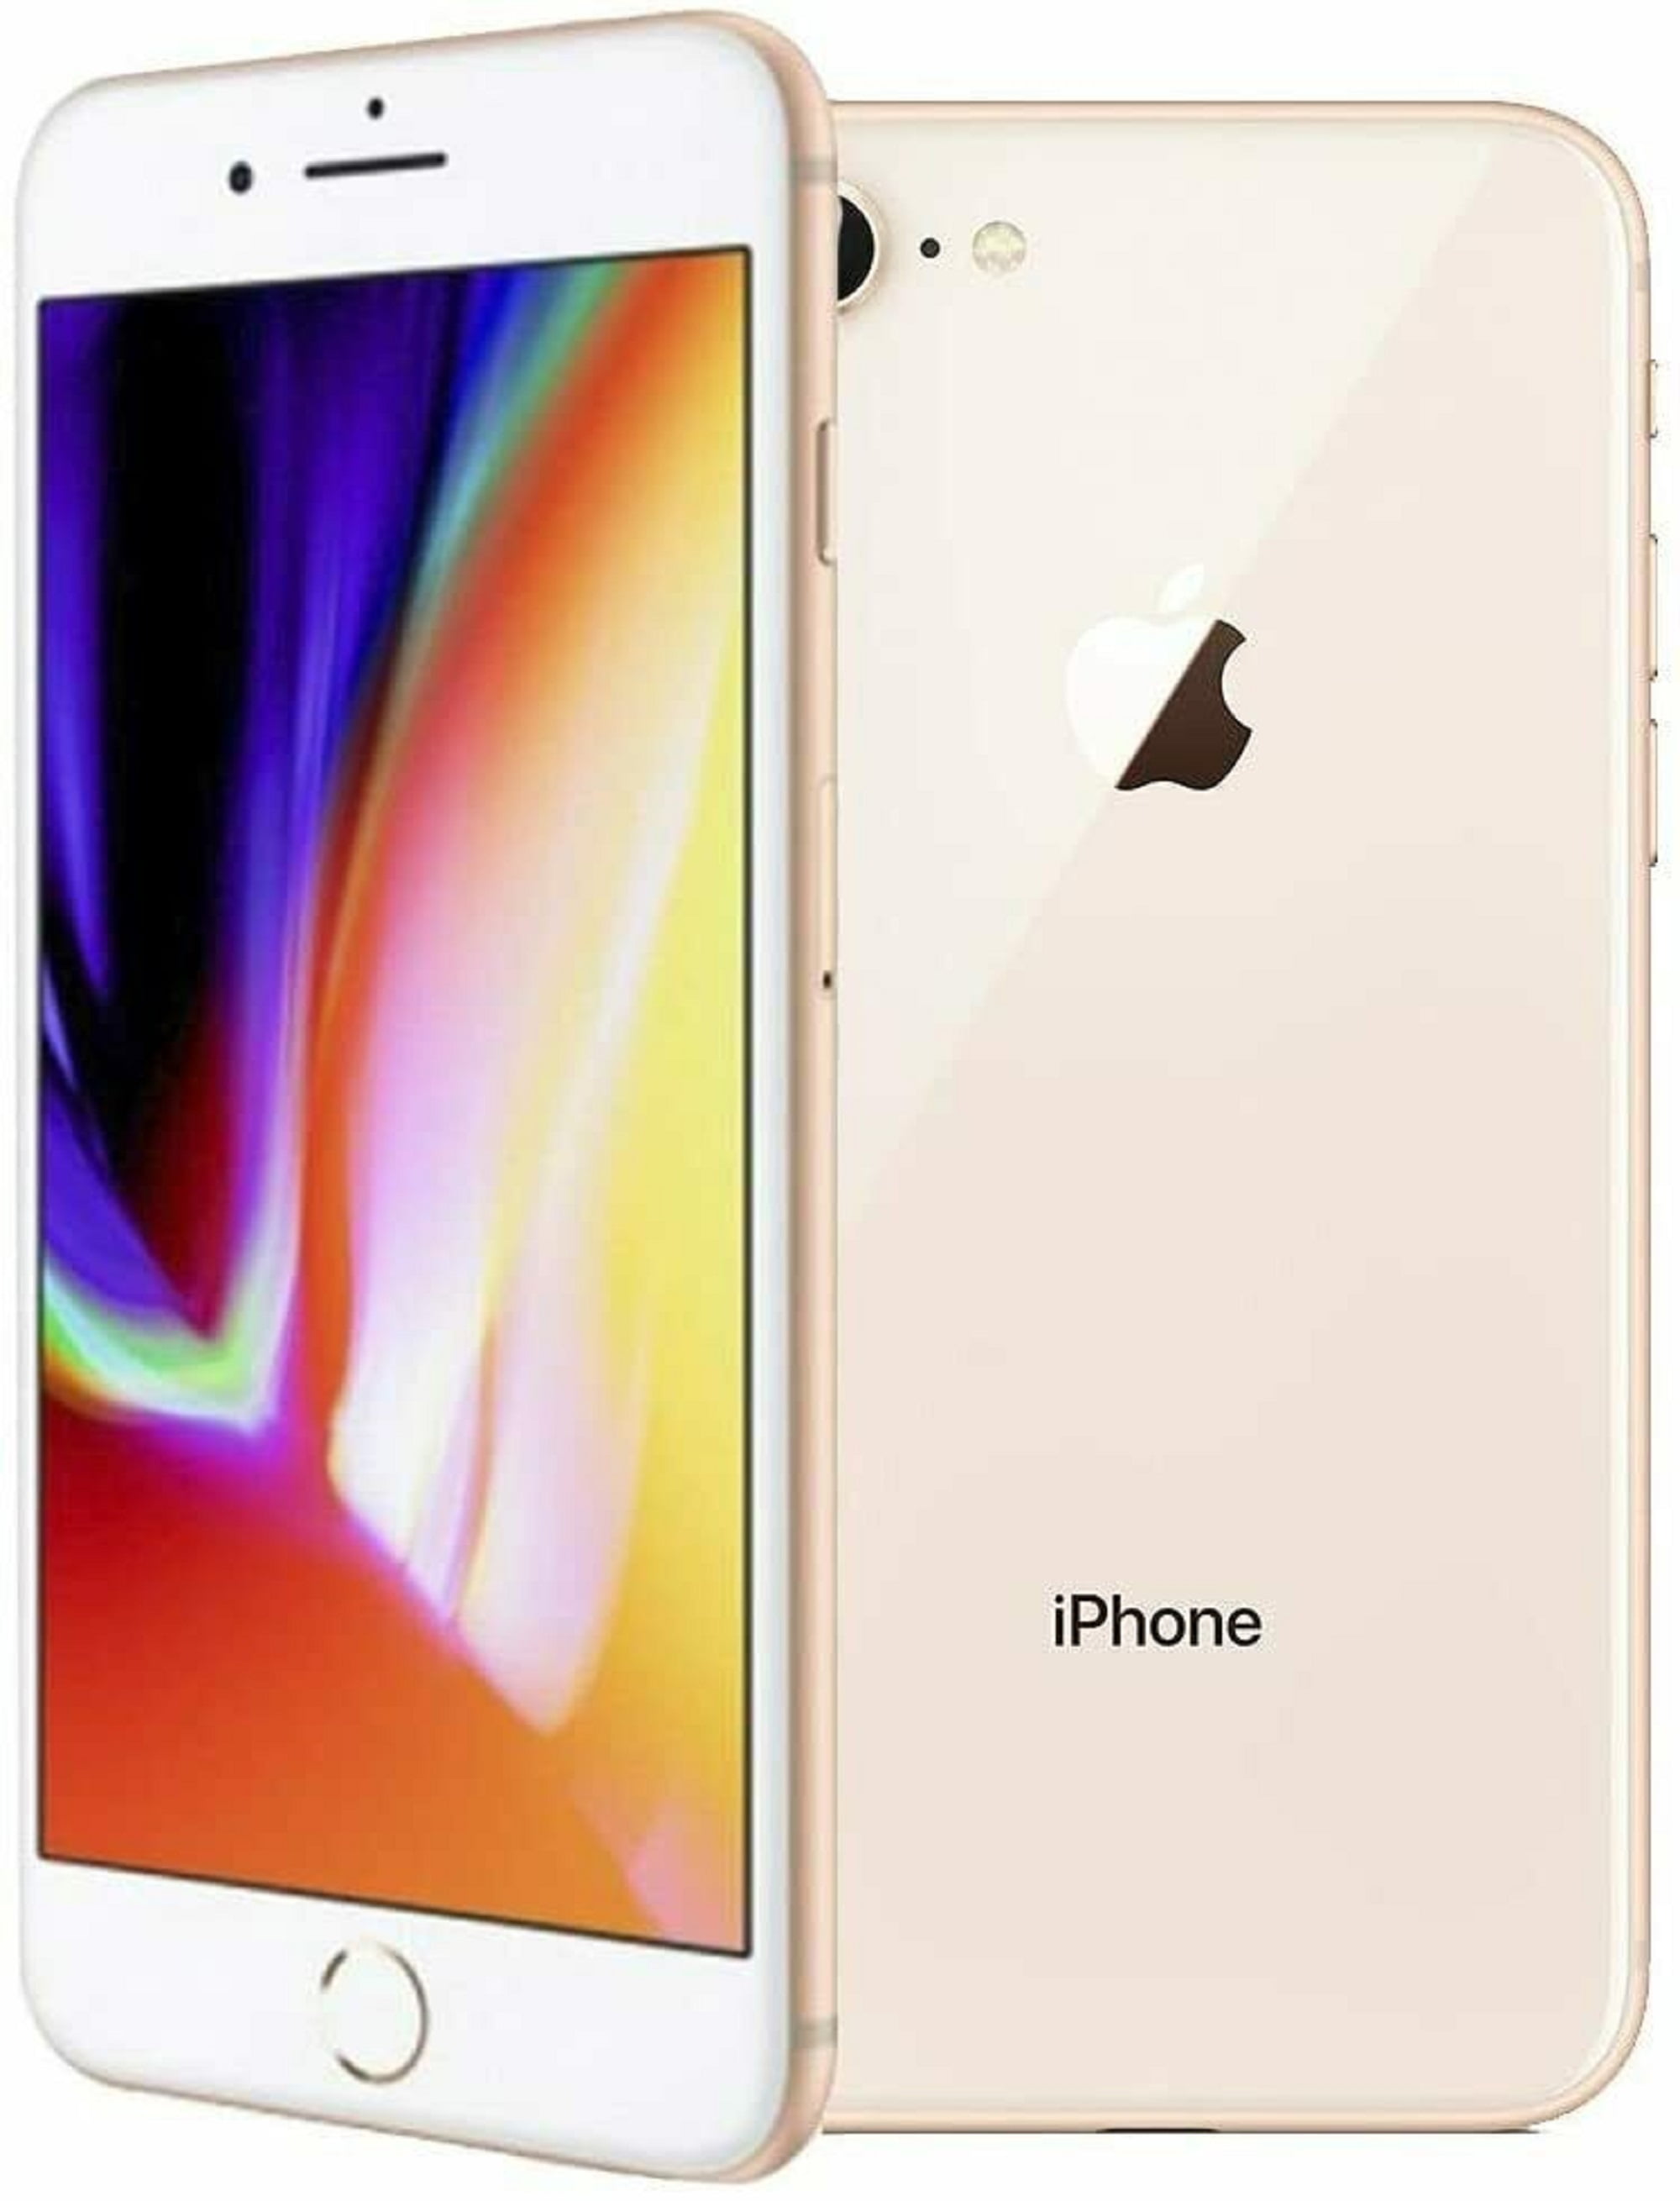 Apple iPhone 8 64GB 128GB 256GB All Colors - Factory Unlocked Cell